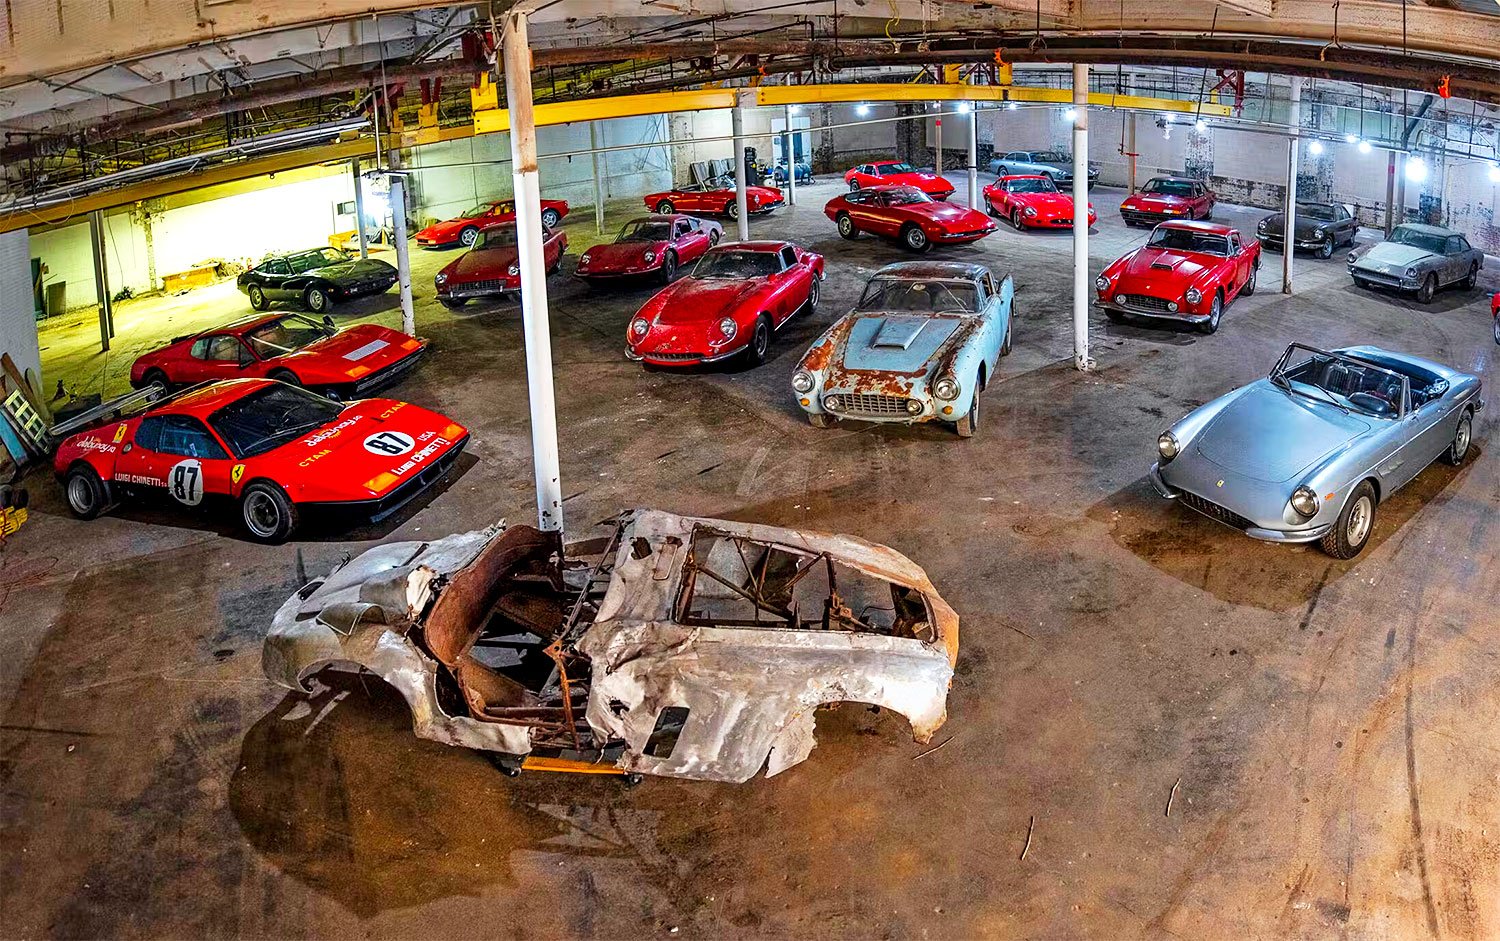 A Low-Key Collector Kept 230 Classic Cars Hidden Away in a Dusty